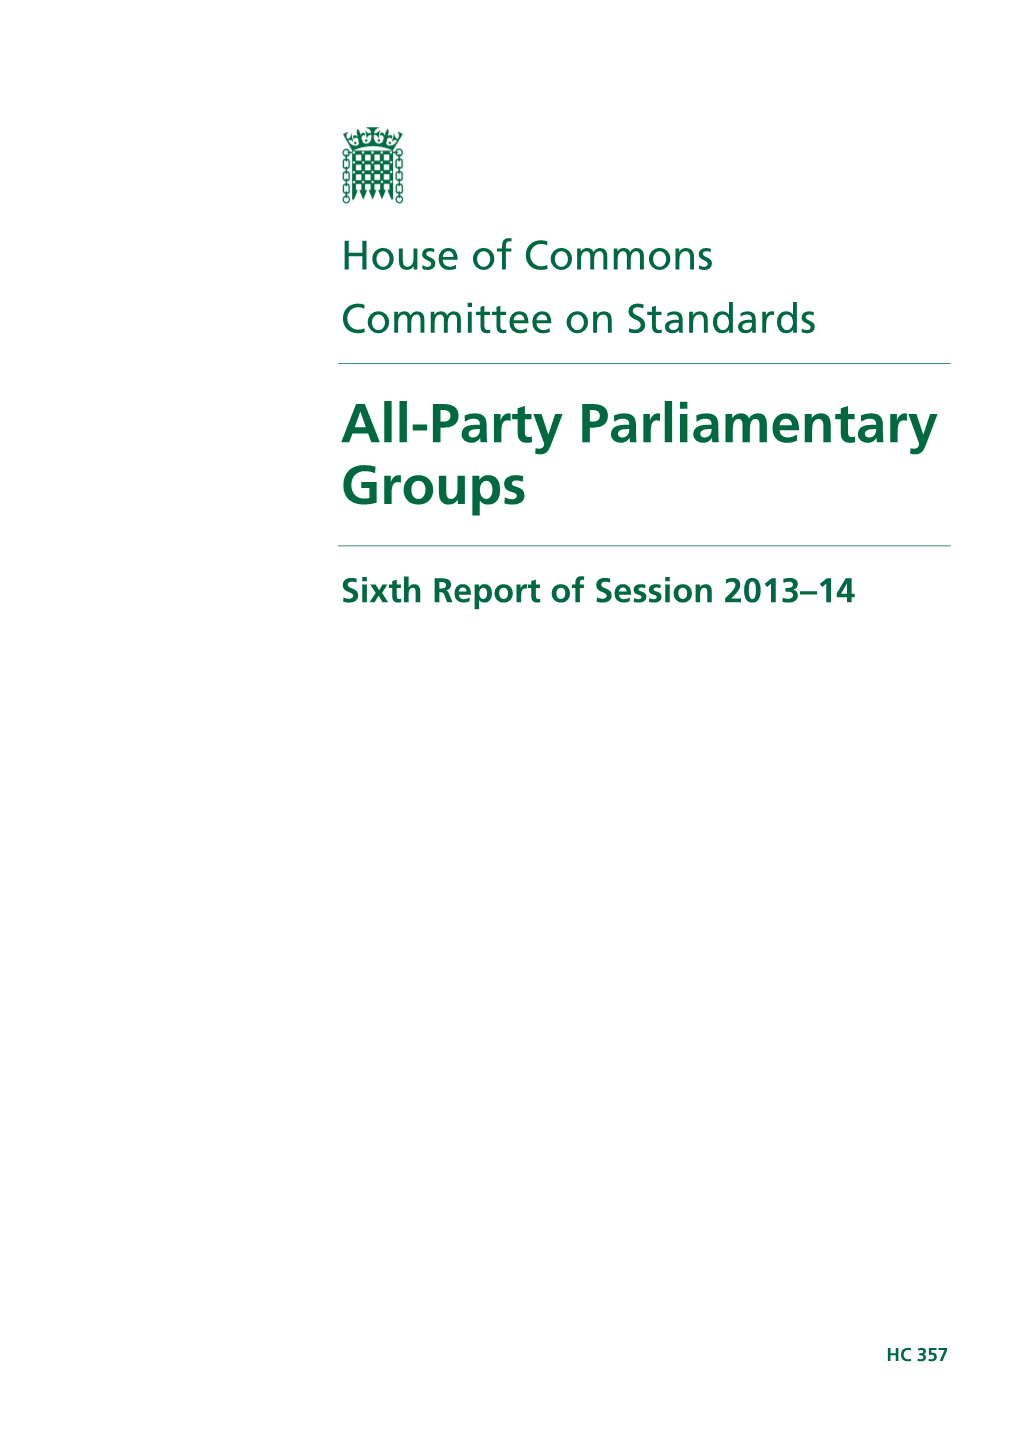 All-Party Parliamentary Groups